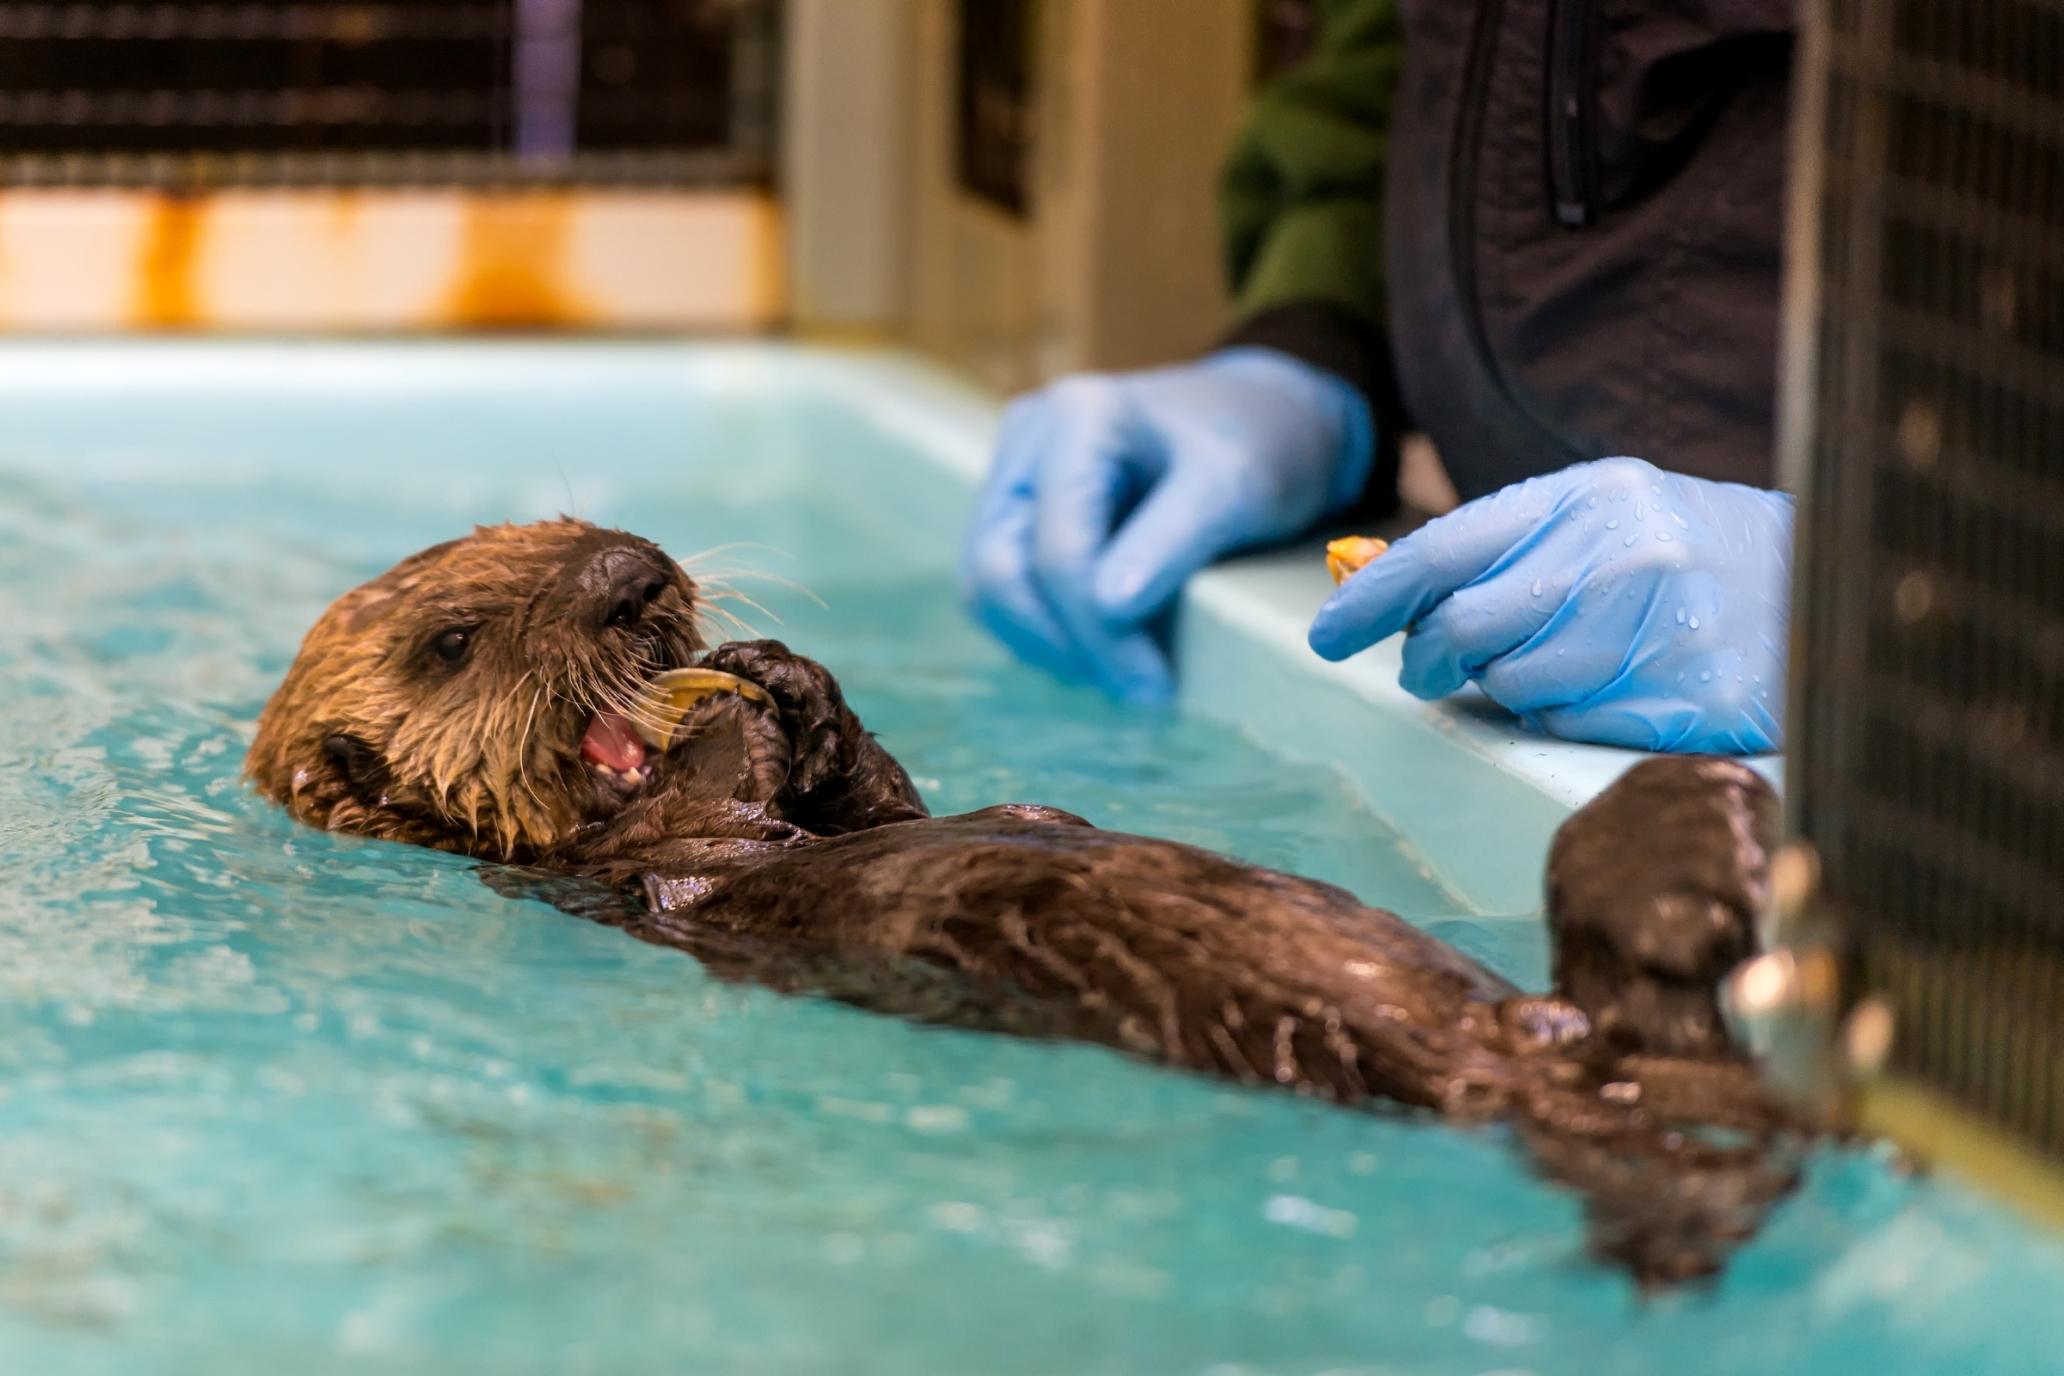 Rescued Baby Sea Otter Finds Home at Shedd Aquarium ...